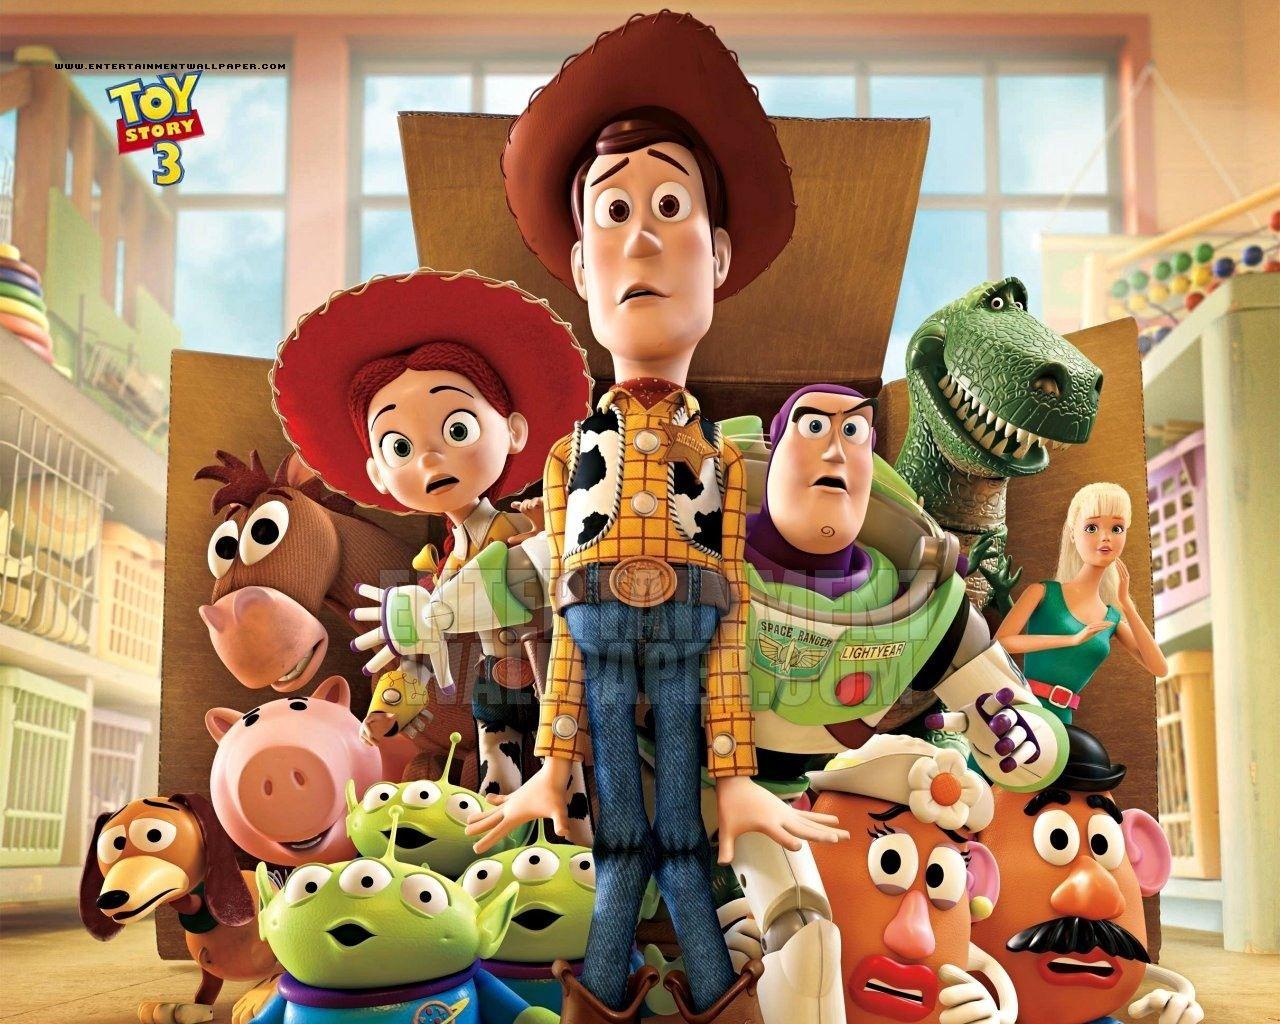 HD Quality Toy Story Image, Toy Story Wallpaper HD Base